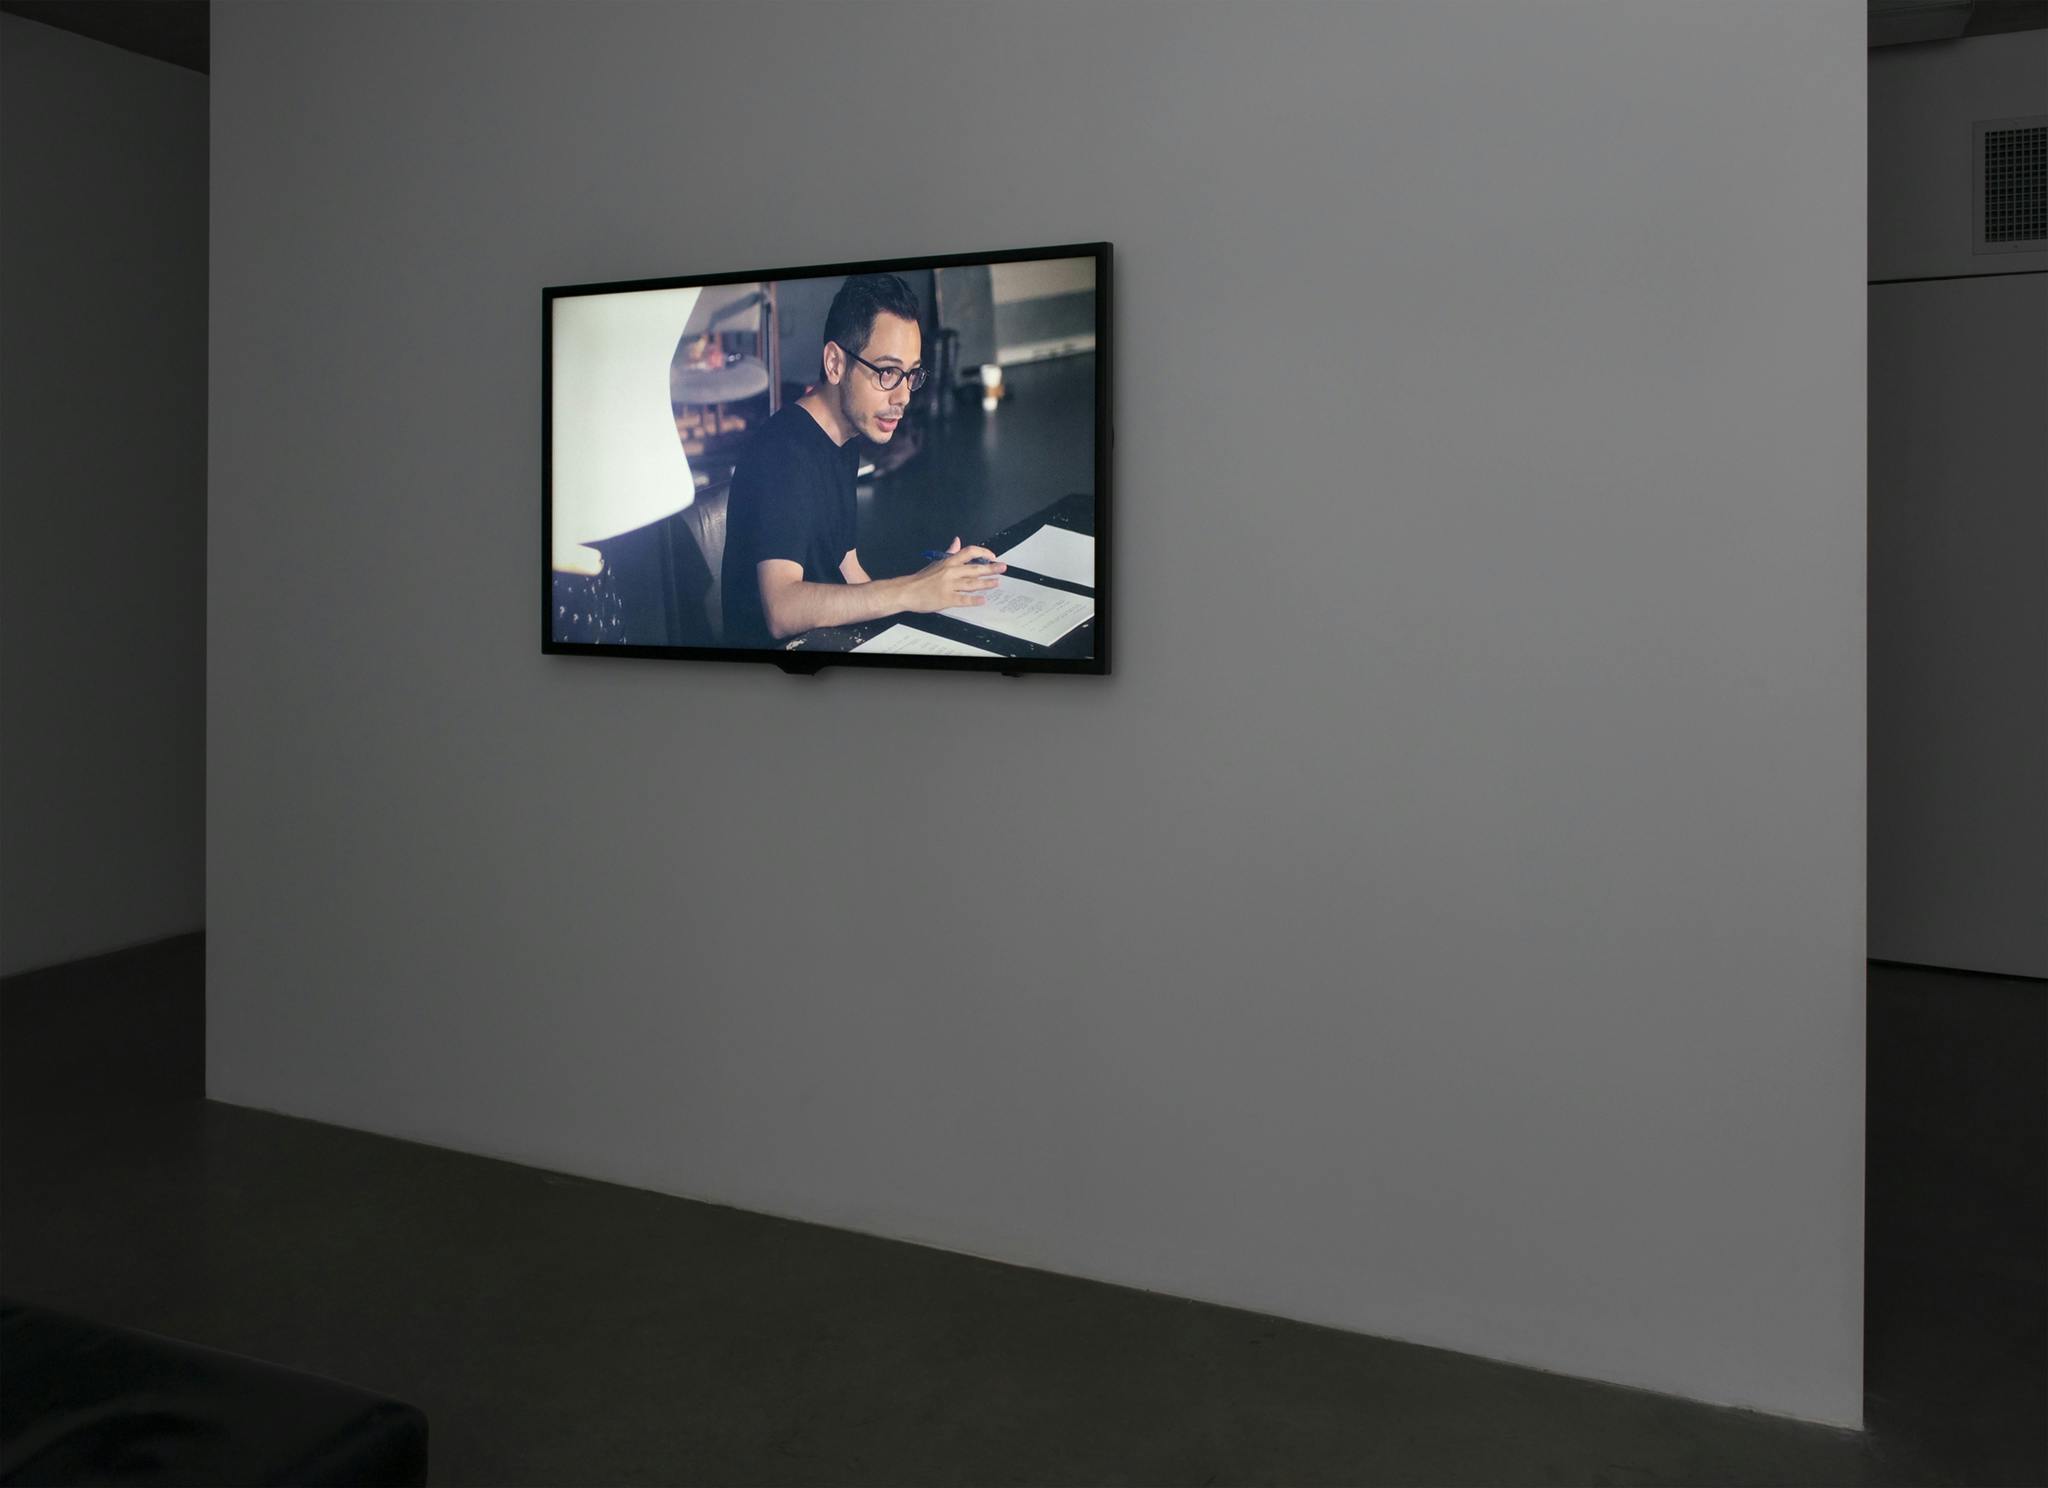 A monitor displaying a video work hangs on the wall of a dark gallery space. Onscreen, an actor sits at a table, auditioning for an imagined documentary.